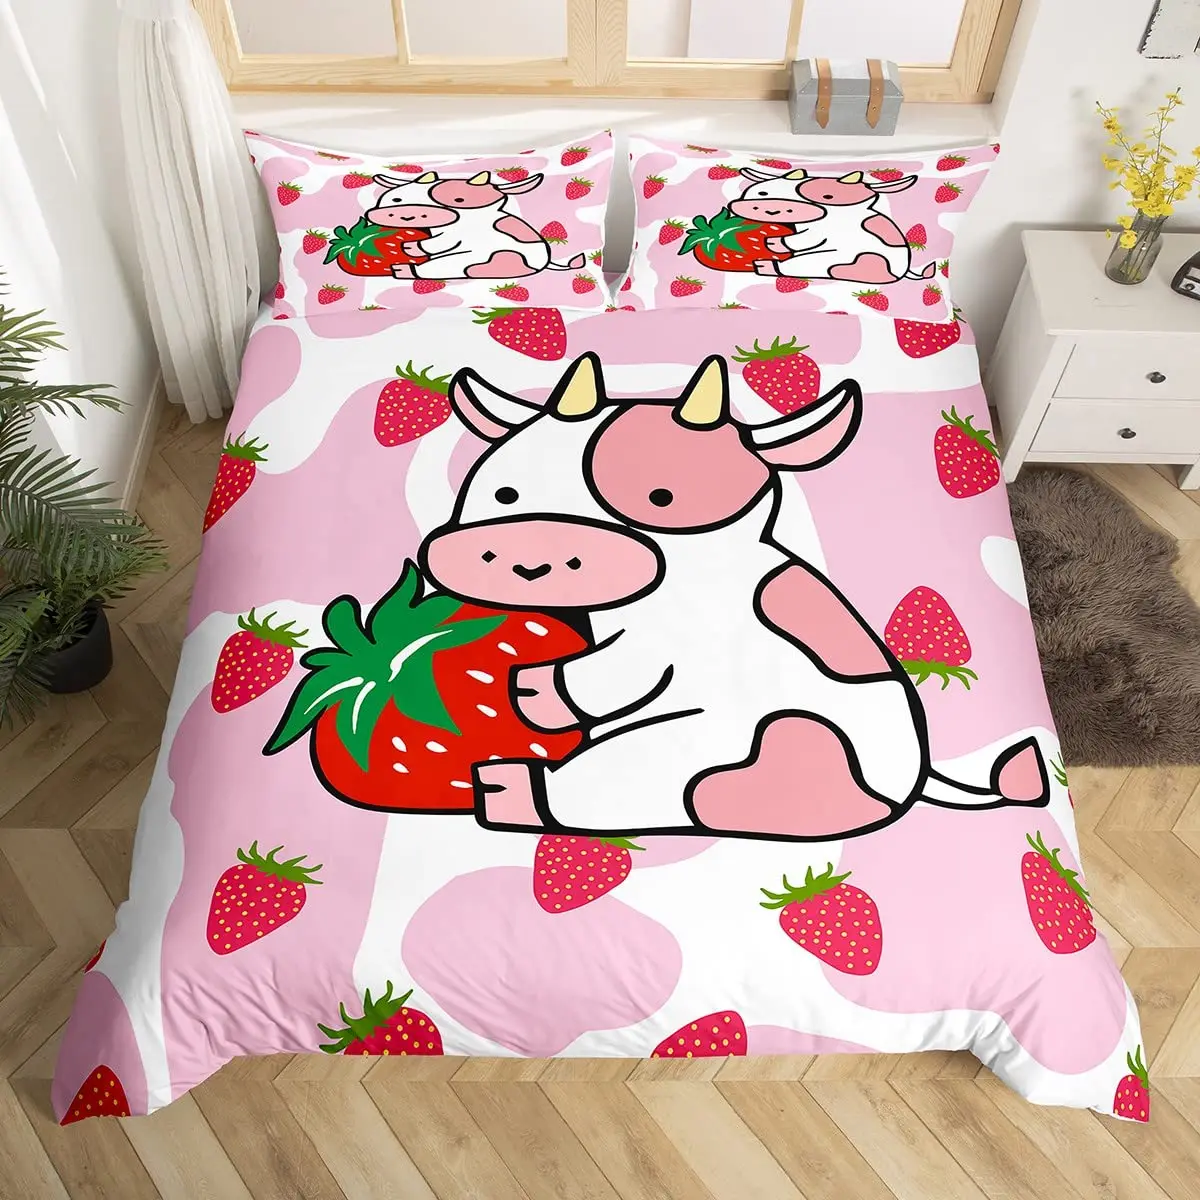 Milk Cow Duvet Cover Set Pink White Cow Strawberry Pattern Comforter Cover Bedding Set for Girls Kawaii Milk Cow Qulit Cover Set